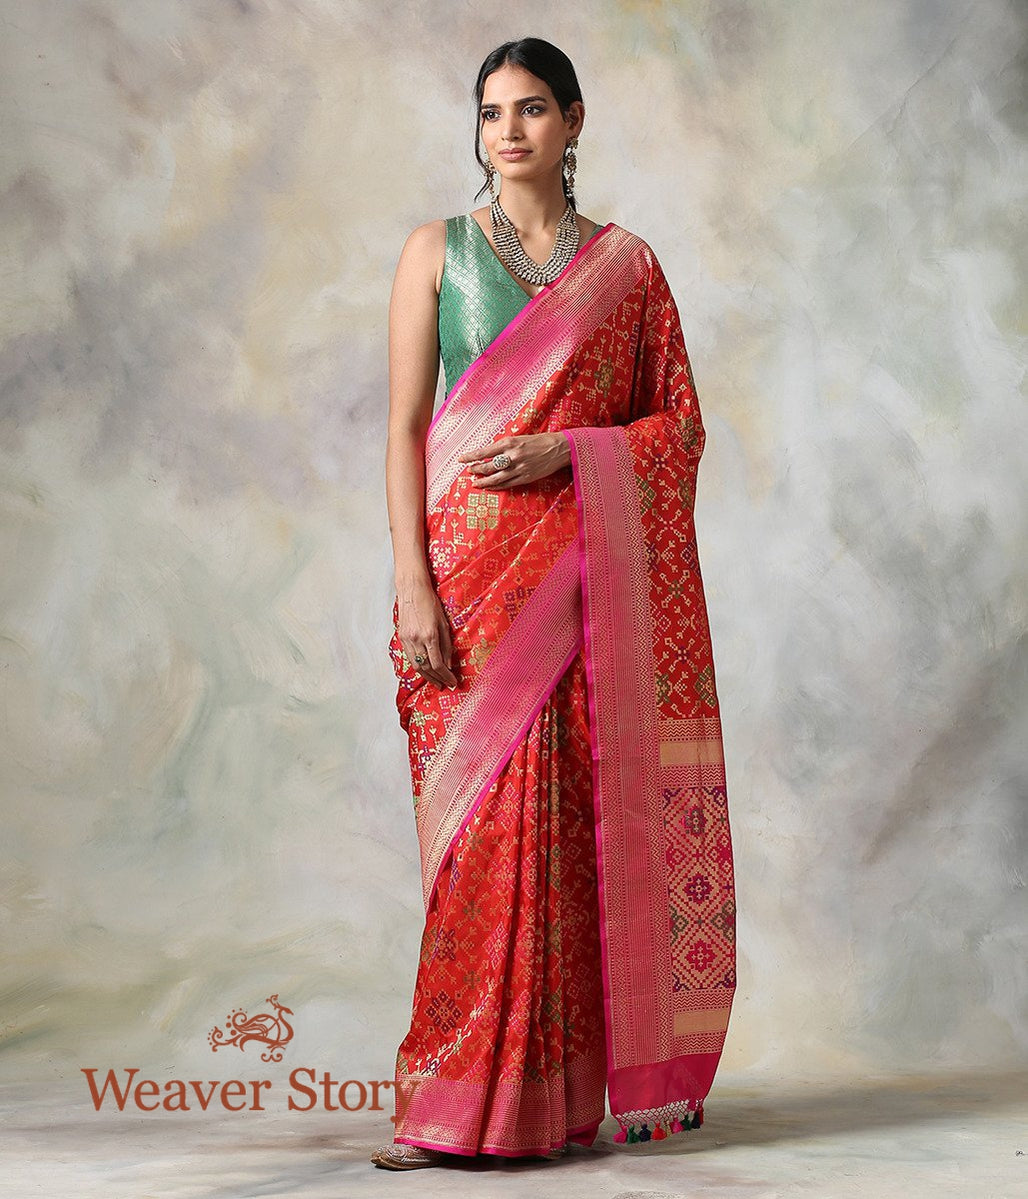 Handwoven_Banarasi_Patola_Saree_in_Red_with_a_Contrast_Blouse_WeaverStory_02